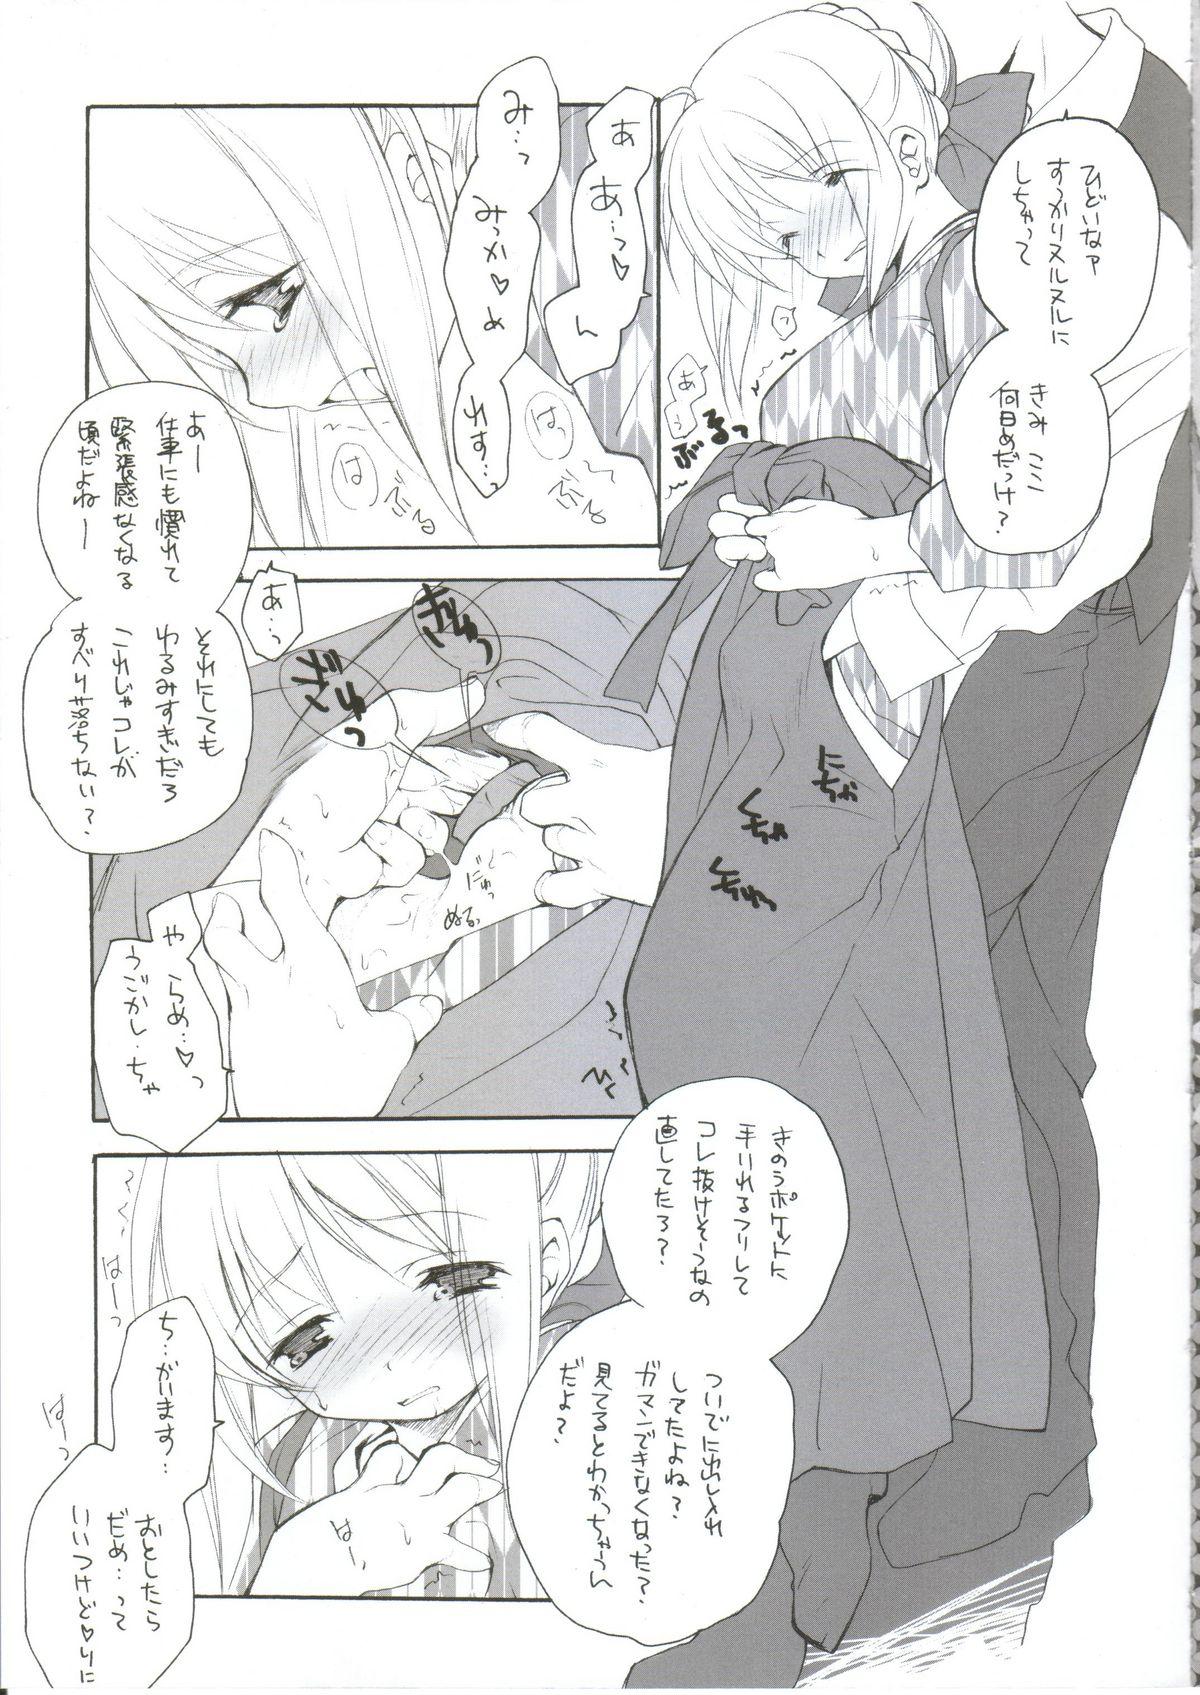 Spanish Citron Ribbon 9 - Fate stay night Soloboy - Page 4